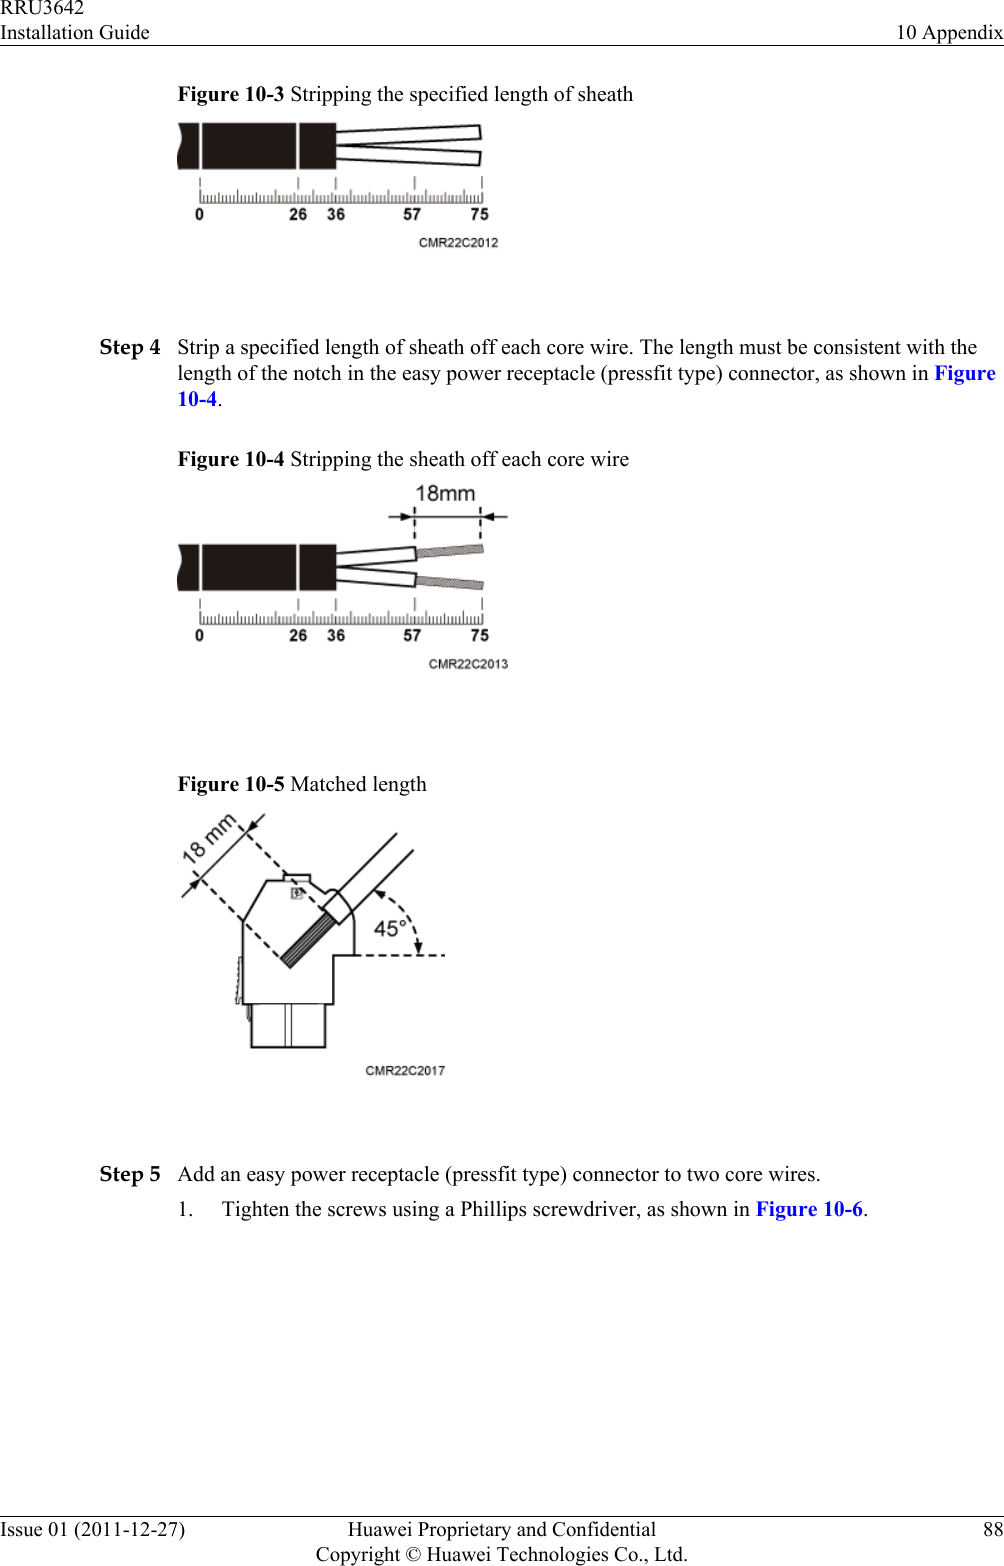 Figure 10-3 Stripping the specified length of sheath Step 4 Strip a specified length of sheath off each core wire. The length must be consistent with thelength of the notch in the easy power receptacle (pressfit type) connector, as shown in Figure10-4.Figure 10-4 Stripping the sheath off each core wire Figure 10-5 Matched length Step 5 Add an easy power receptacle (pressfit type) connector to two core wires.1. Tighten the screws using a Phillips screwdriver, as shown in Figure 10-6.RRU3642Installation Guide 10 AppendixIssue 01 (2011-12-27) Huawei Proprietary and ConfidentialCopyright © Huawei Technologies Co., Ltd.88